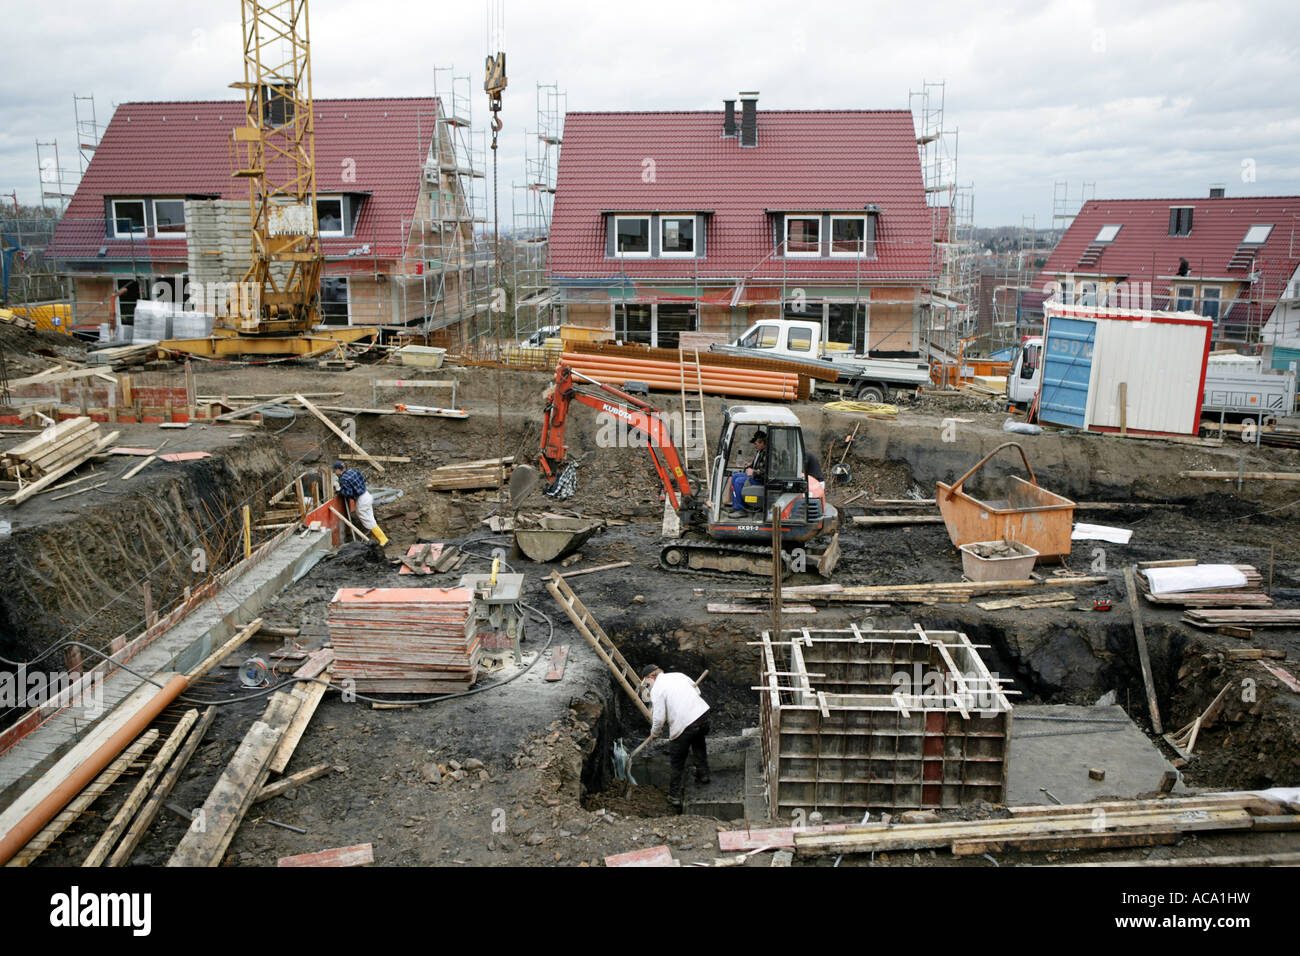 Concrete works at the foundation of a house, Essen, North Rhine-Westphalia, Germany Stock Photo